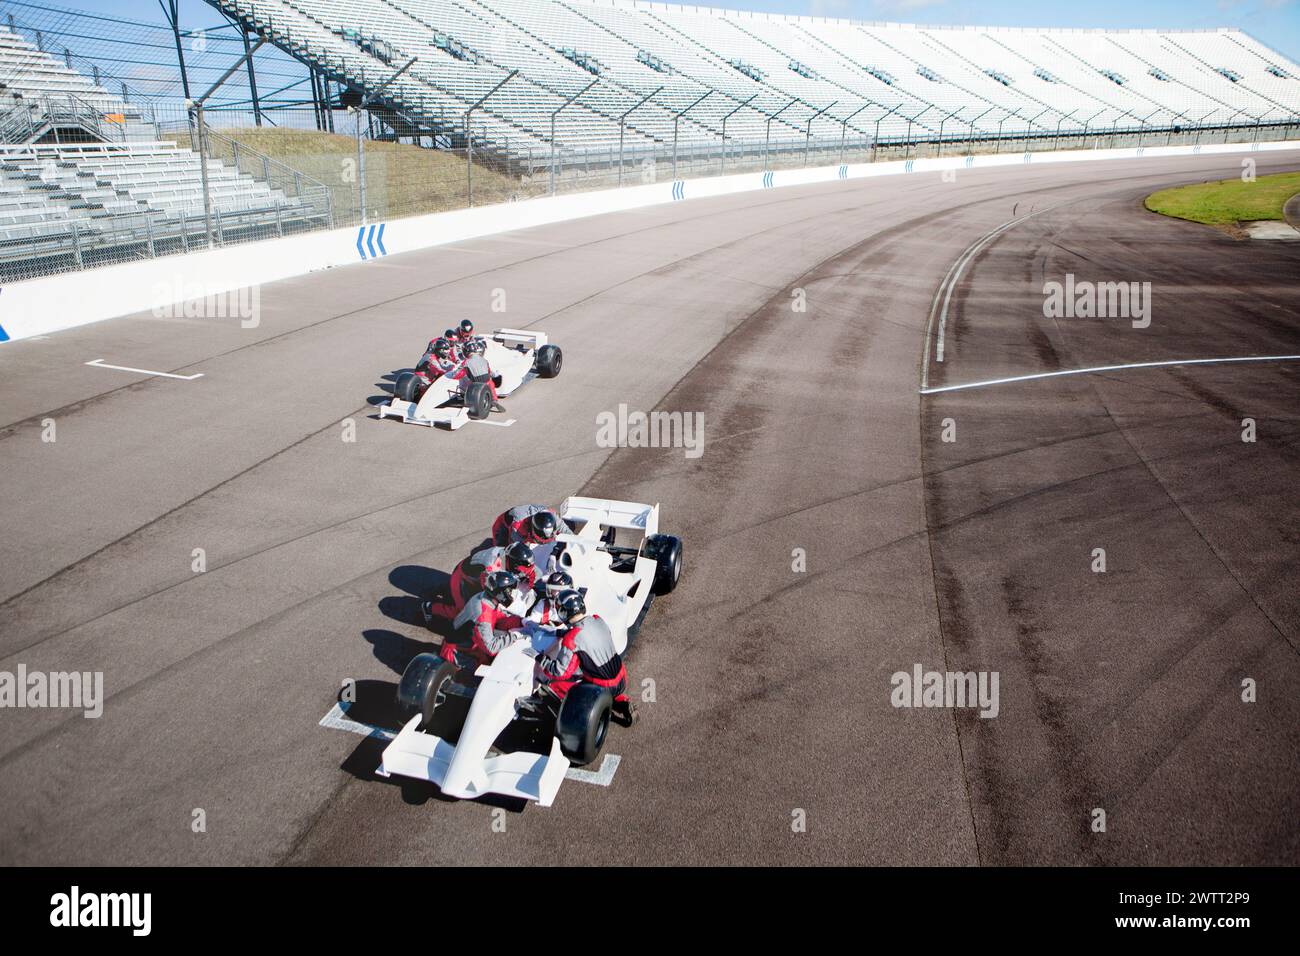 Two racing cars vying for position on a sunlit track Stock Photo